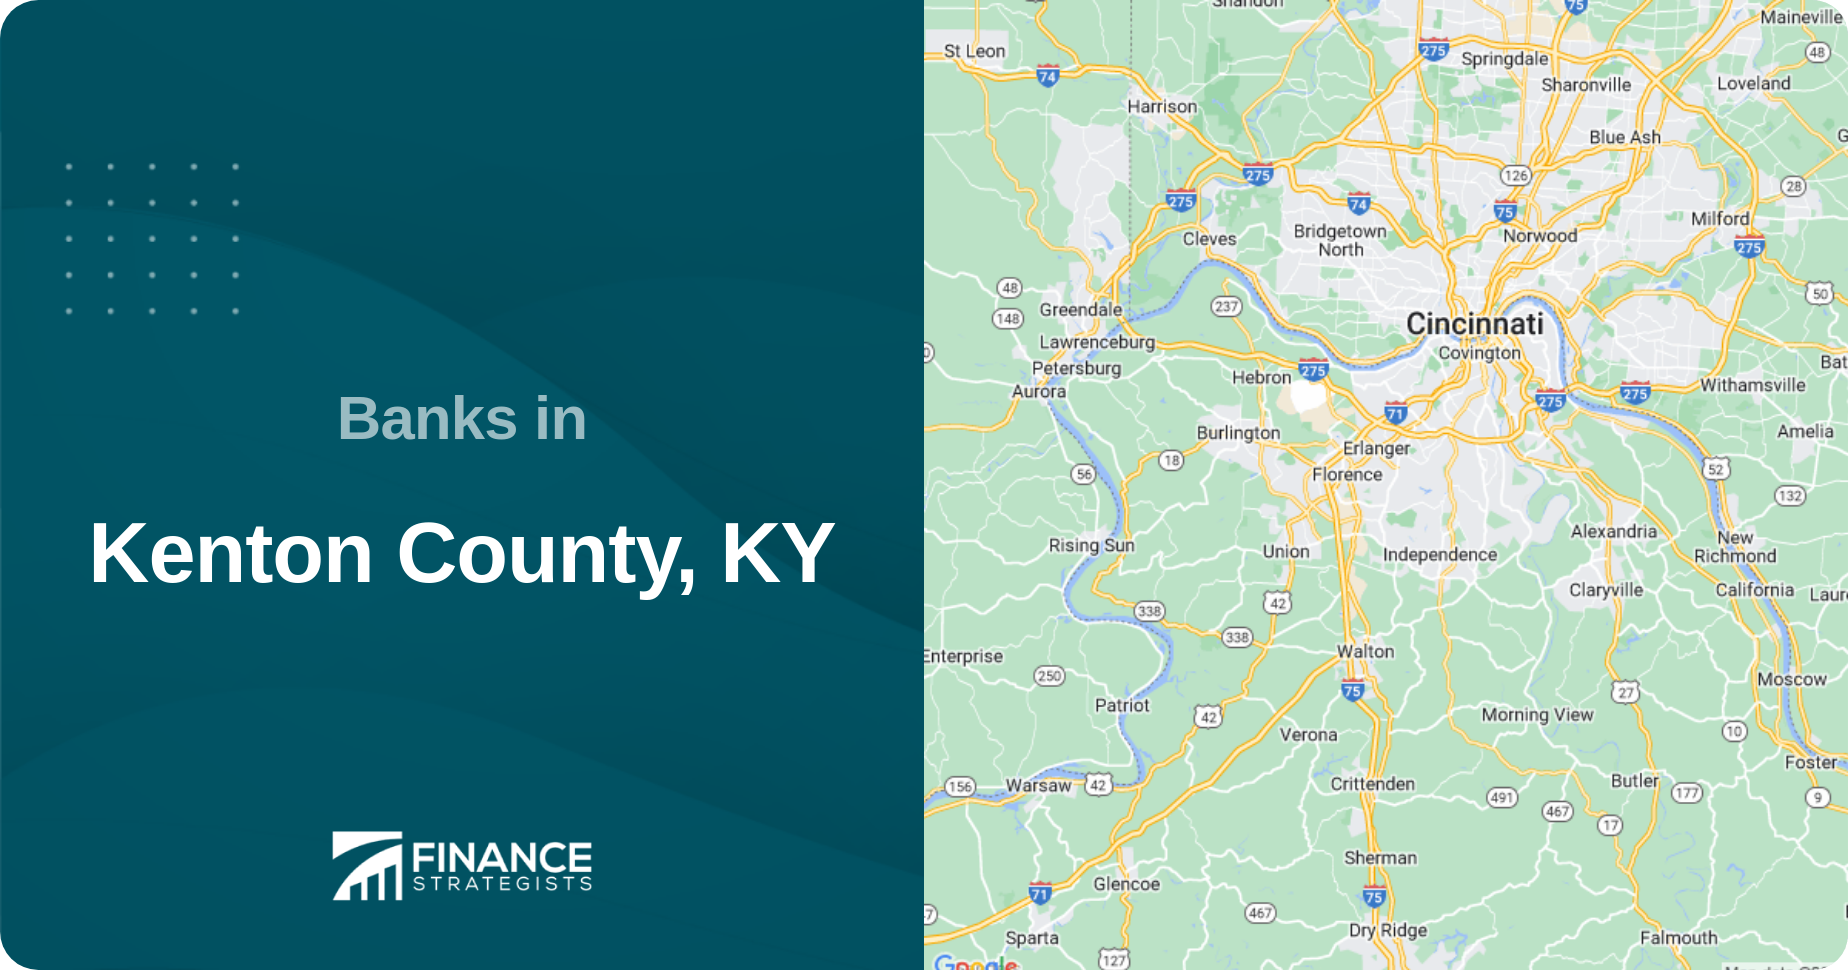 Banks in Kenton County, KY